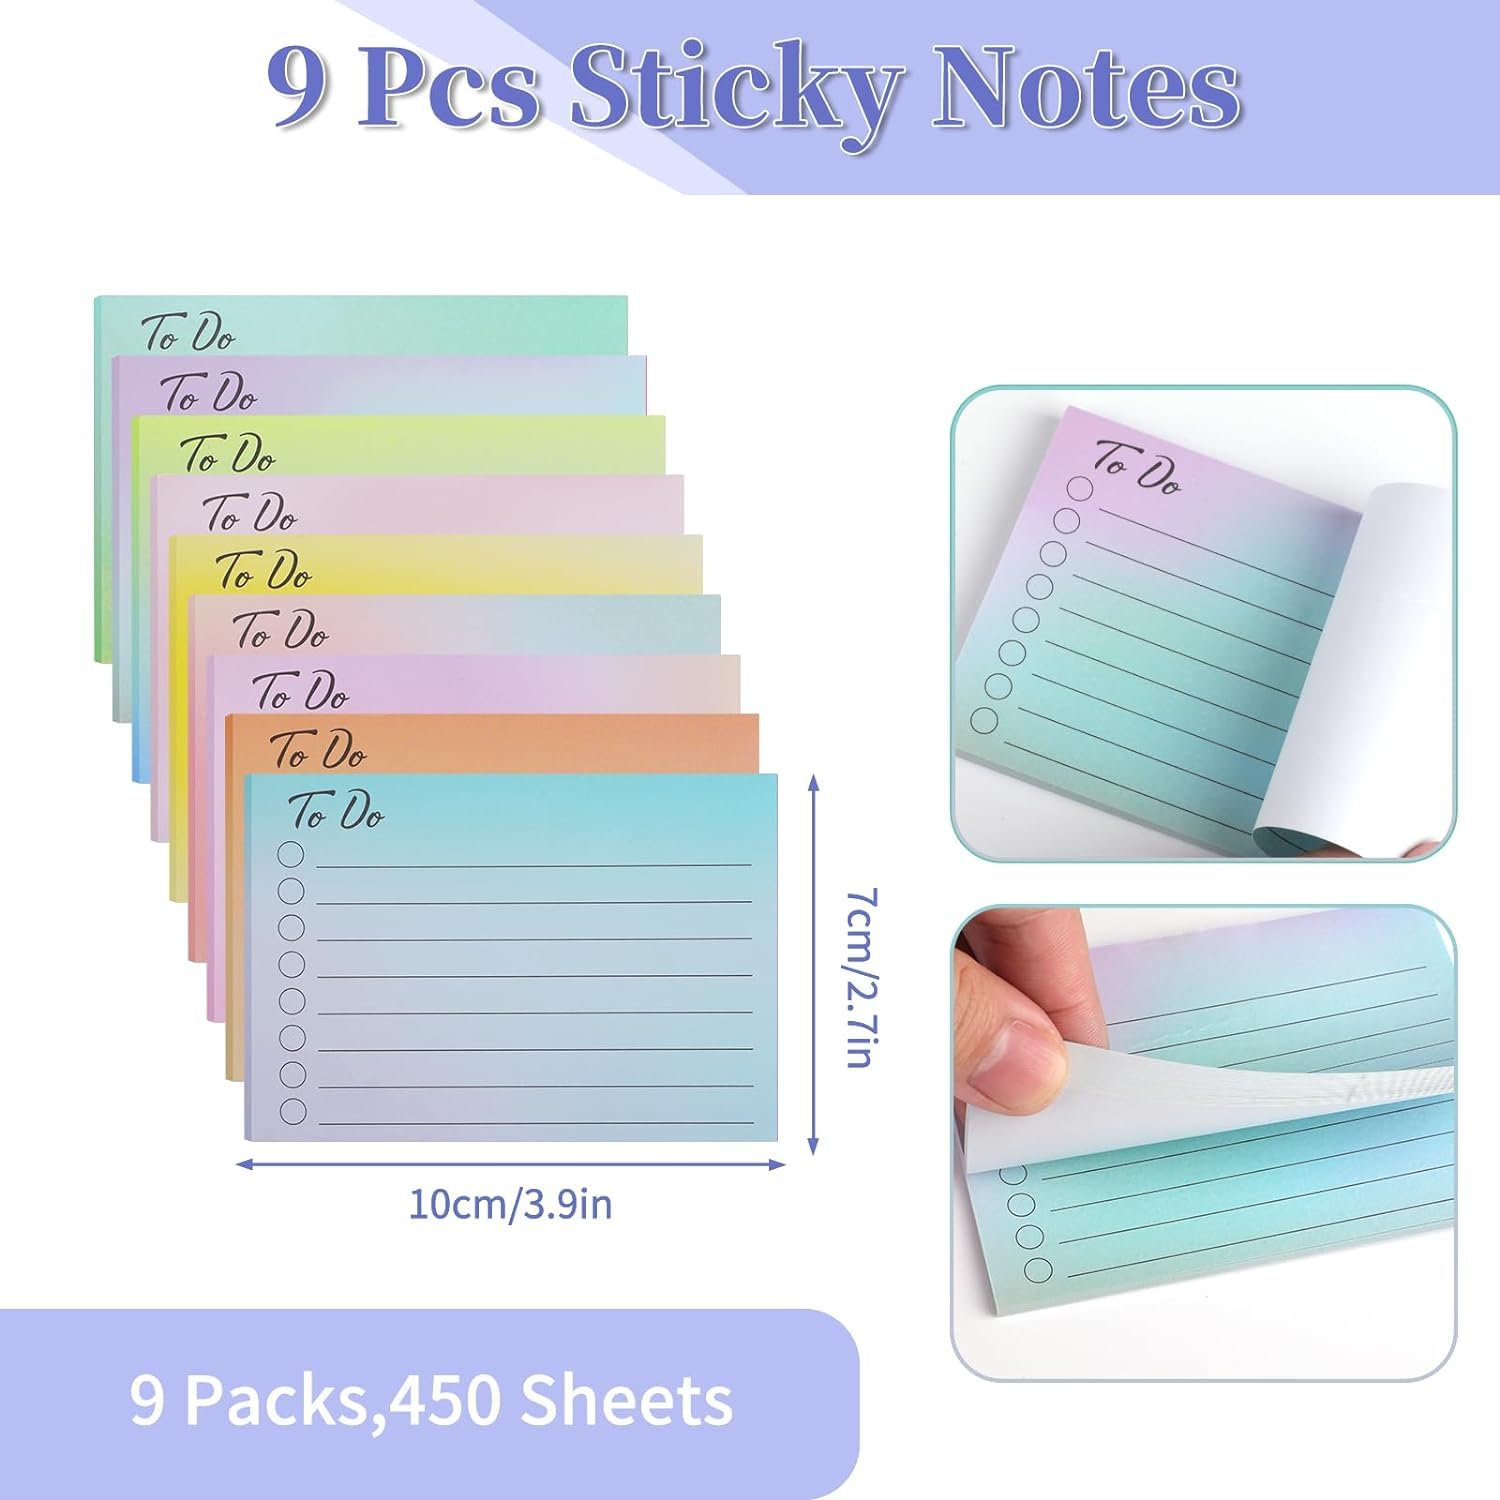 Hoiny 300 Sheets Transparent Sticky Notes, Writable Clear Adhesive See Through Tracing Paper Translucent Book Tabs Annotating, Study Revision Essentials - Round